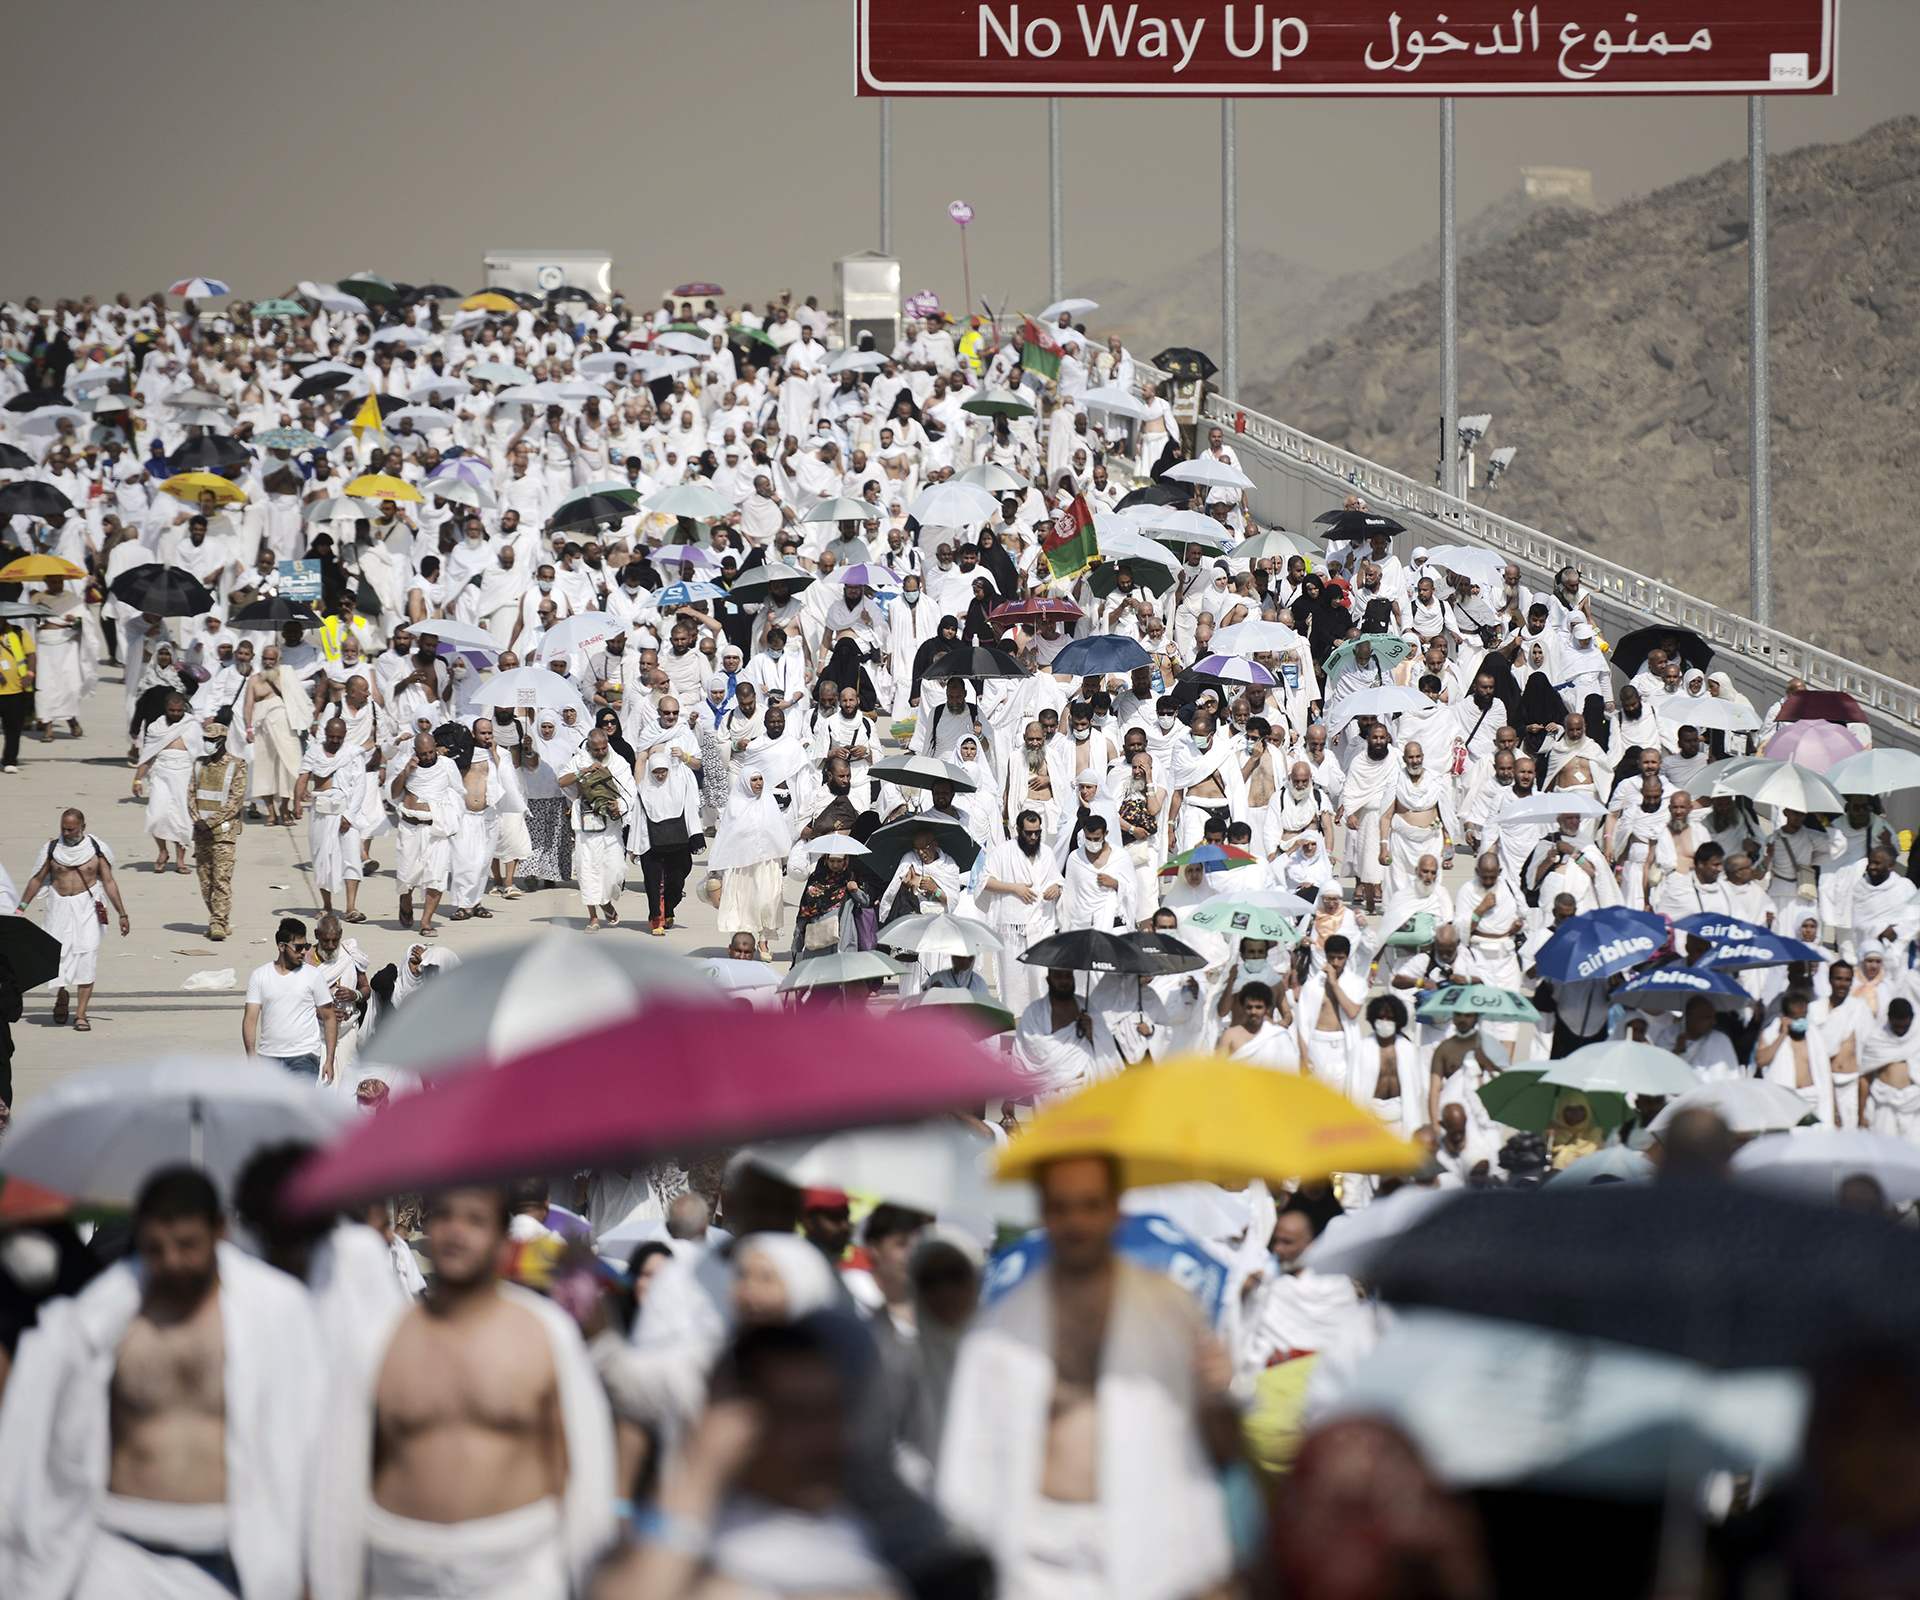 Death toll rises to 900 after pilgrimage stampede in Mecca